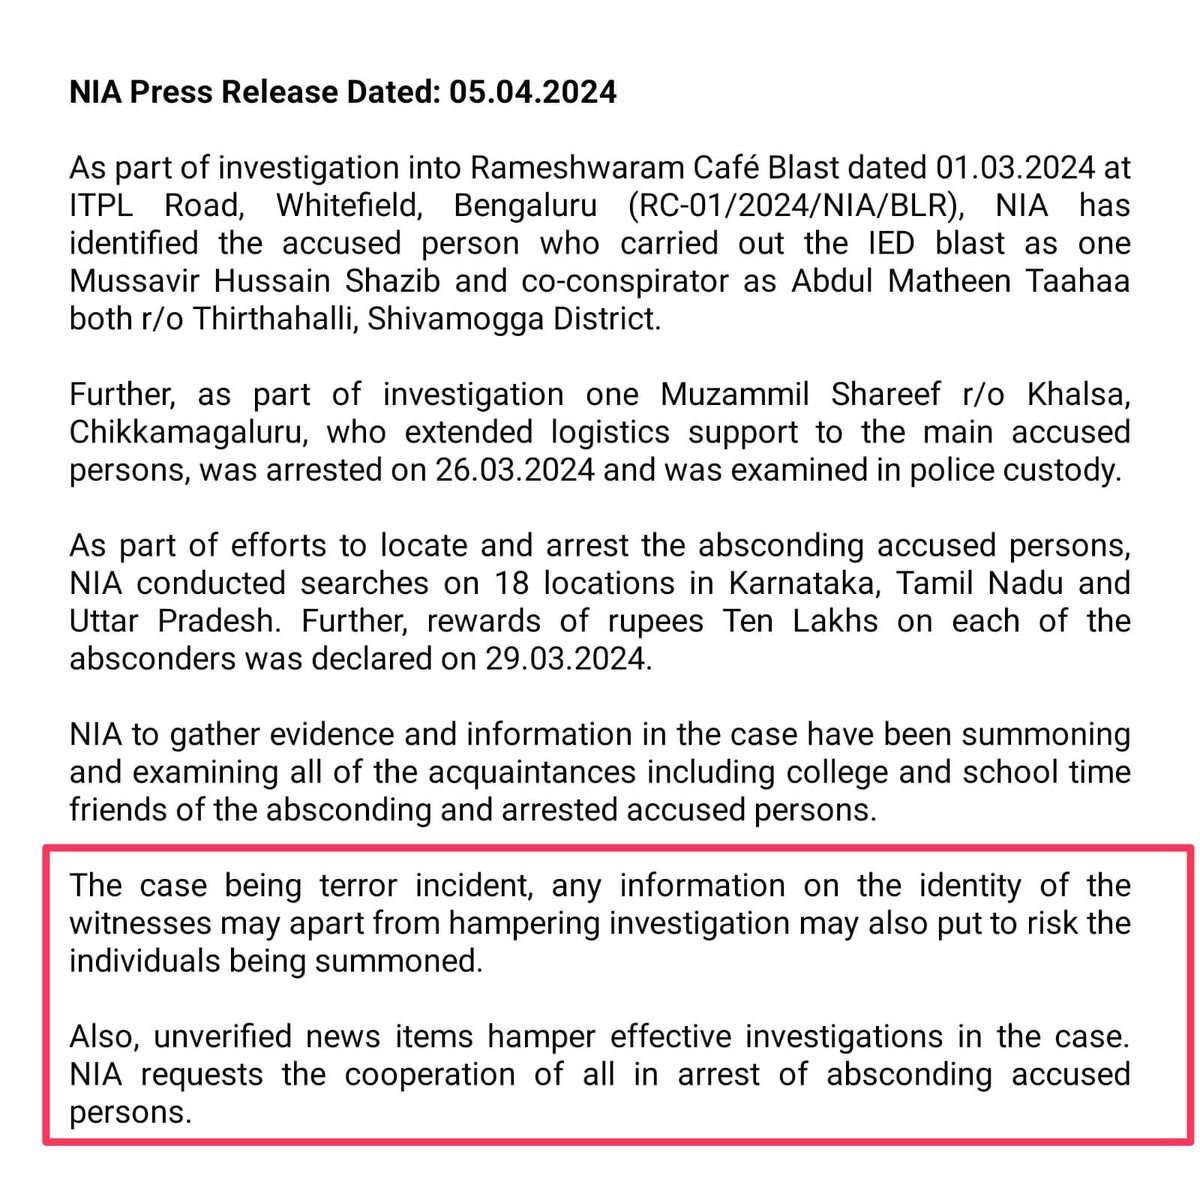 Serial Fake News Spreader #LavanyaBJ is spreading fake news of Linking #RameshwaramCafeBlast witness Sai Prasad with #RameshwaramCafe blast and has pinned it despite NIA Clarification. They are doing so because they want to frame a Hindu and save Jehadis.
#TheKeralaStory